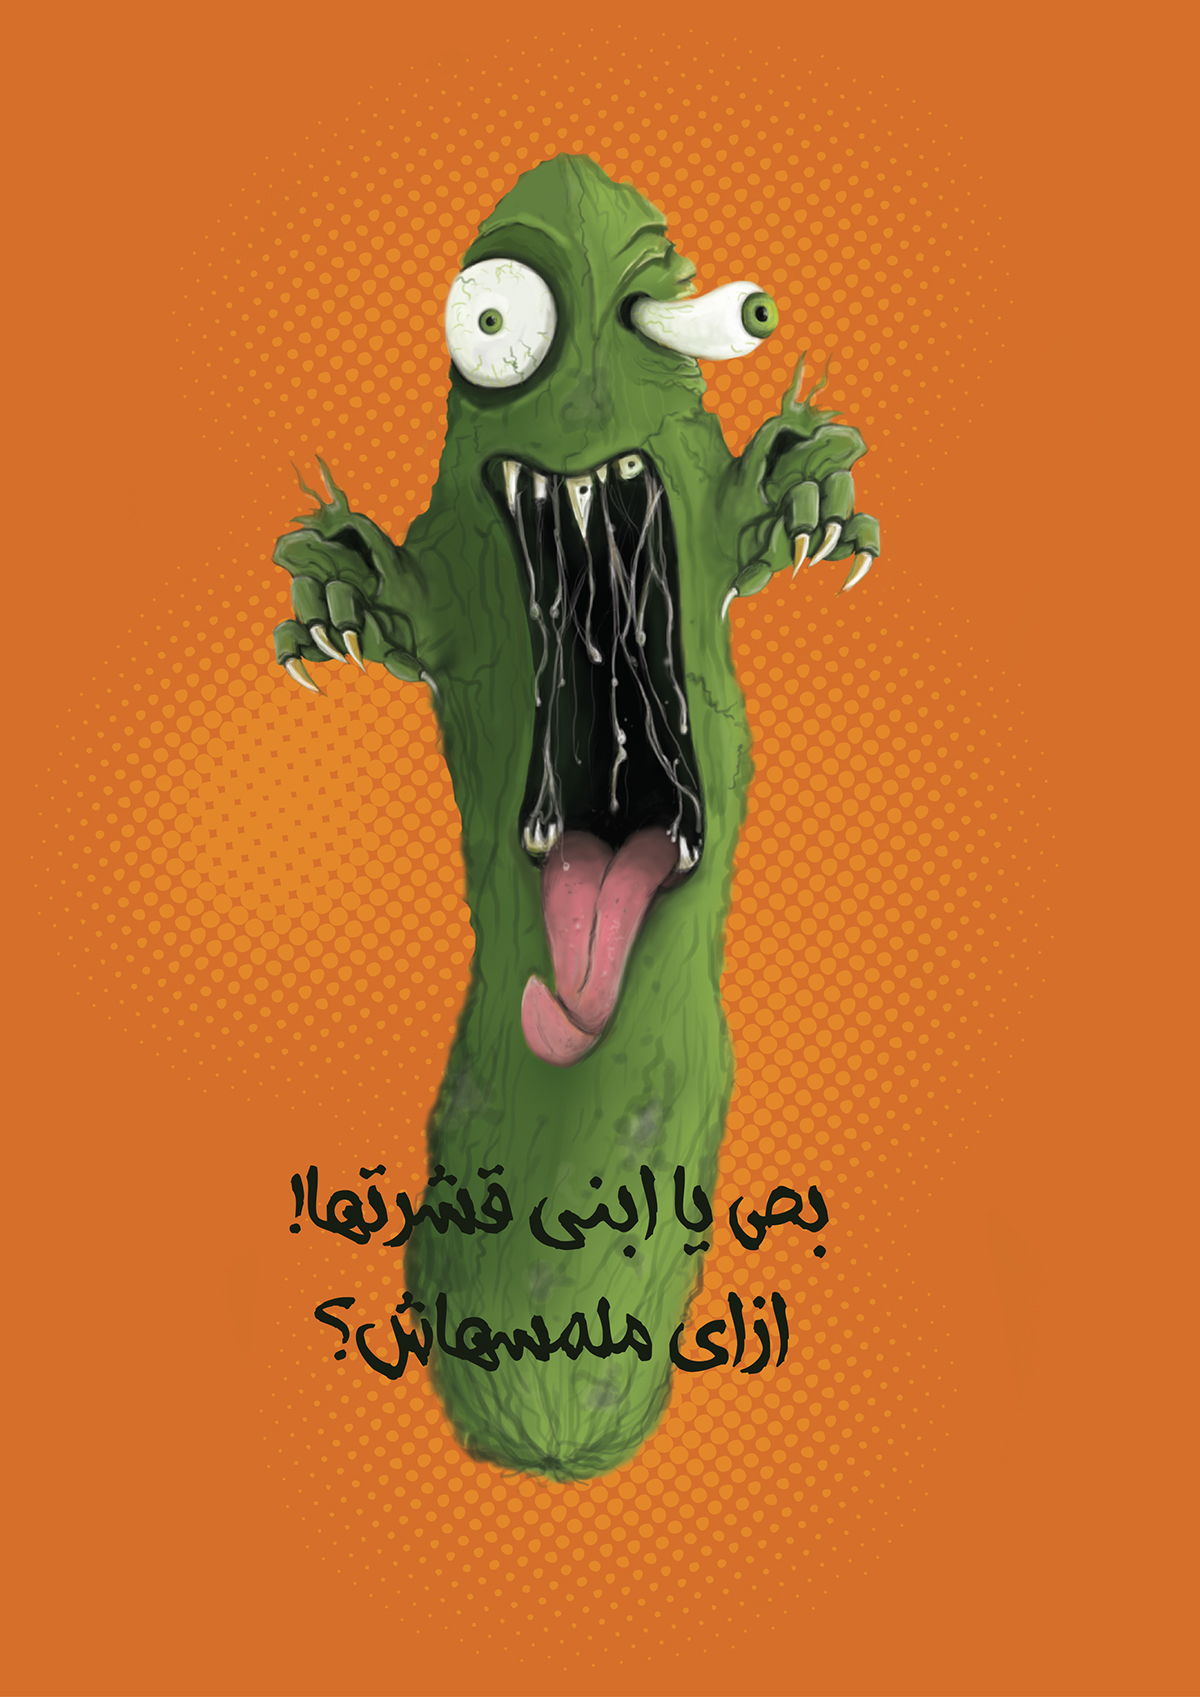 sexual harassment egypt cucumber digital painting brochure campaign Anti-Harassment